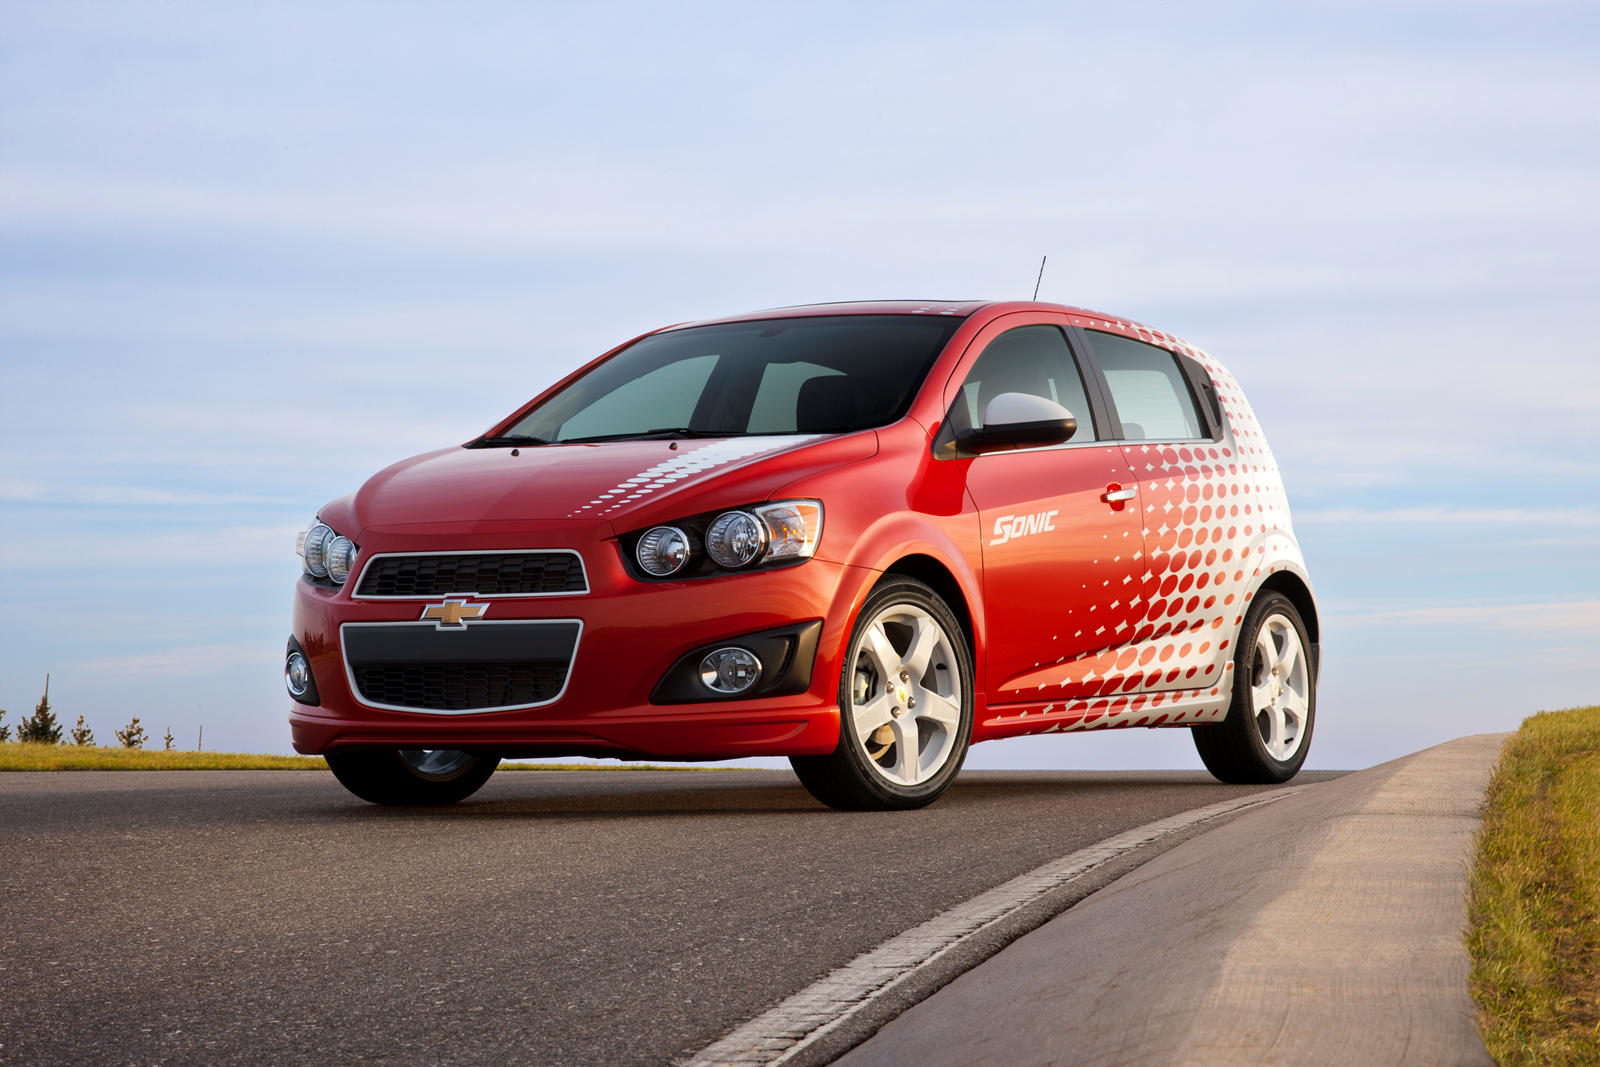 2012 Chevrolet Sonic Hatchback Front Angle View